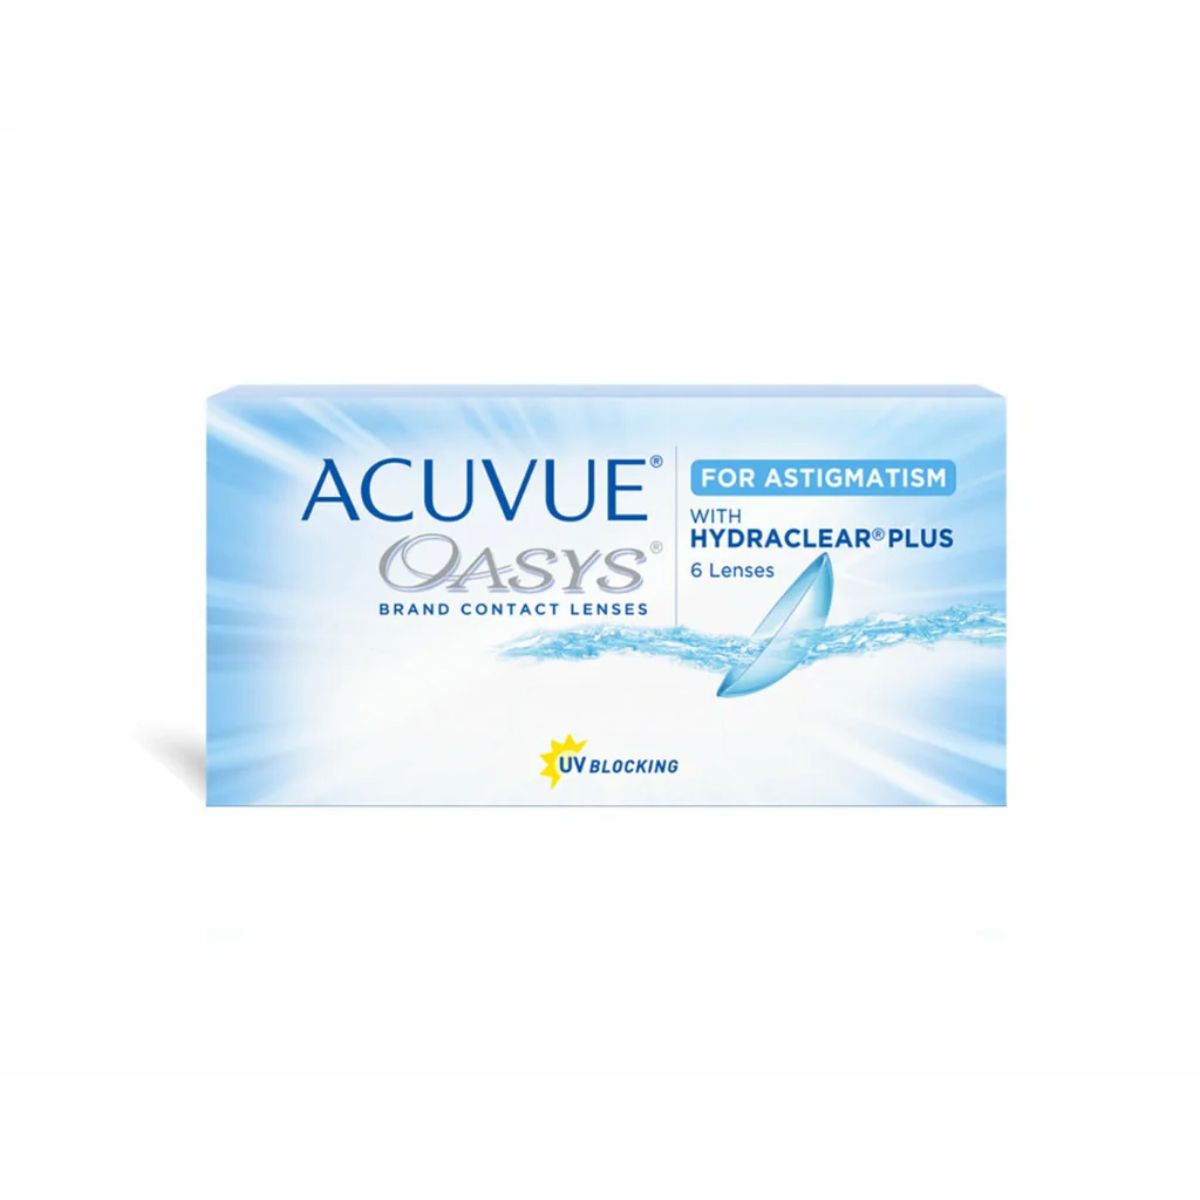 " Shop Acuvue Oasys for Astigmatism and Other Bi Weekly Contact Lenses"